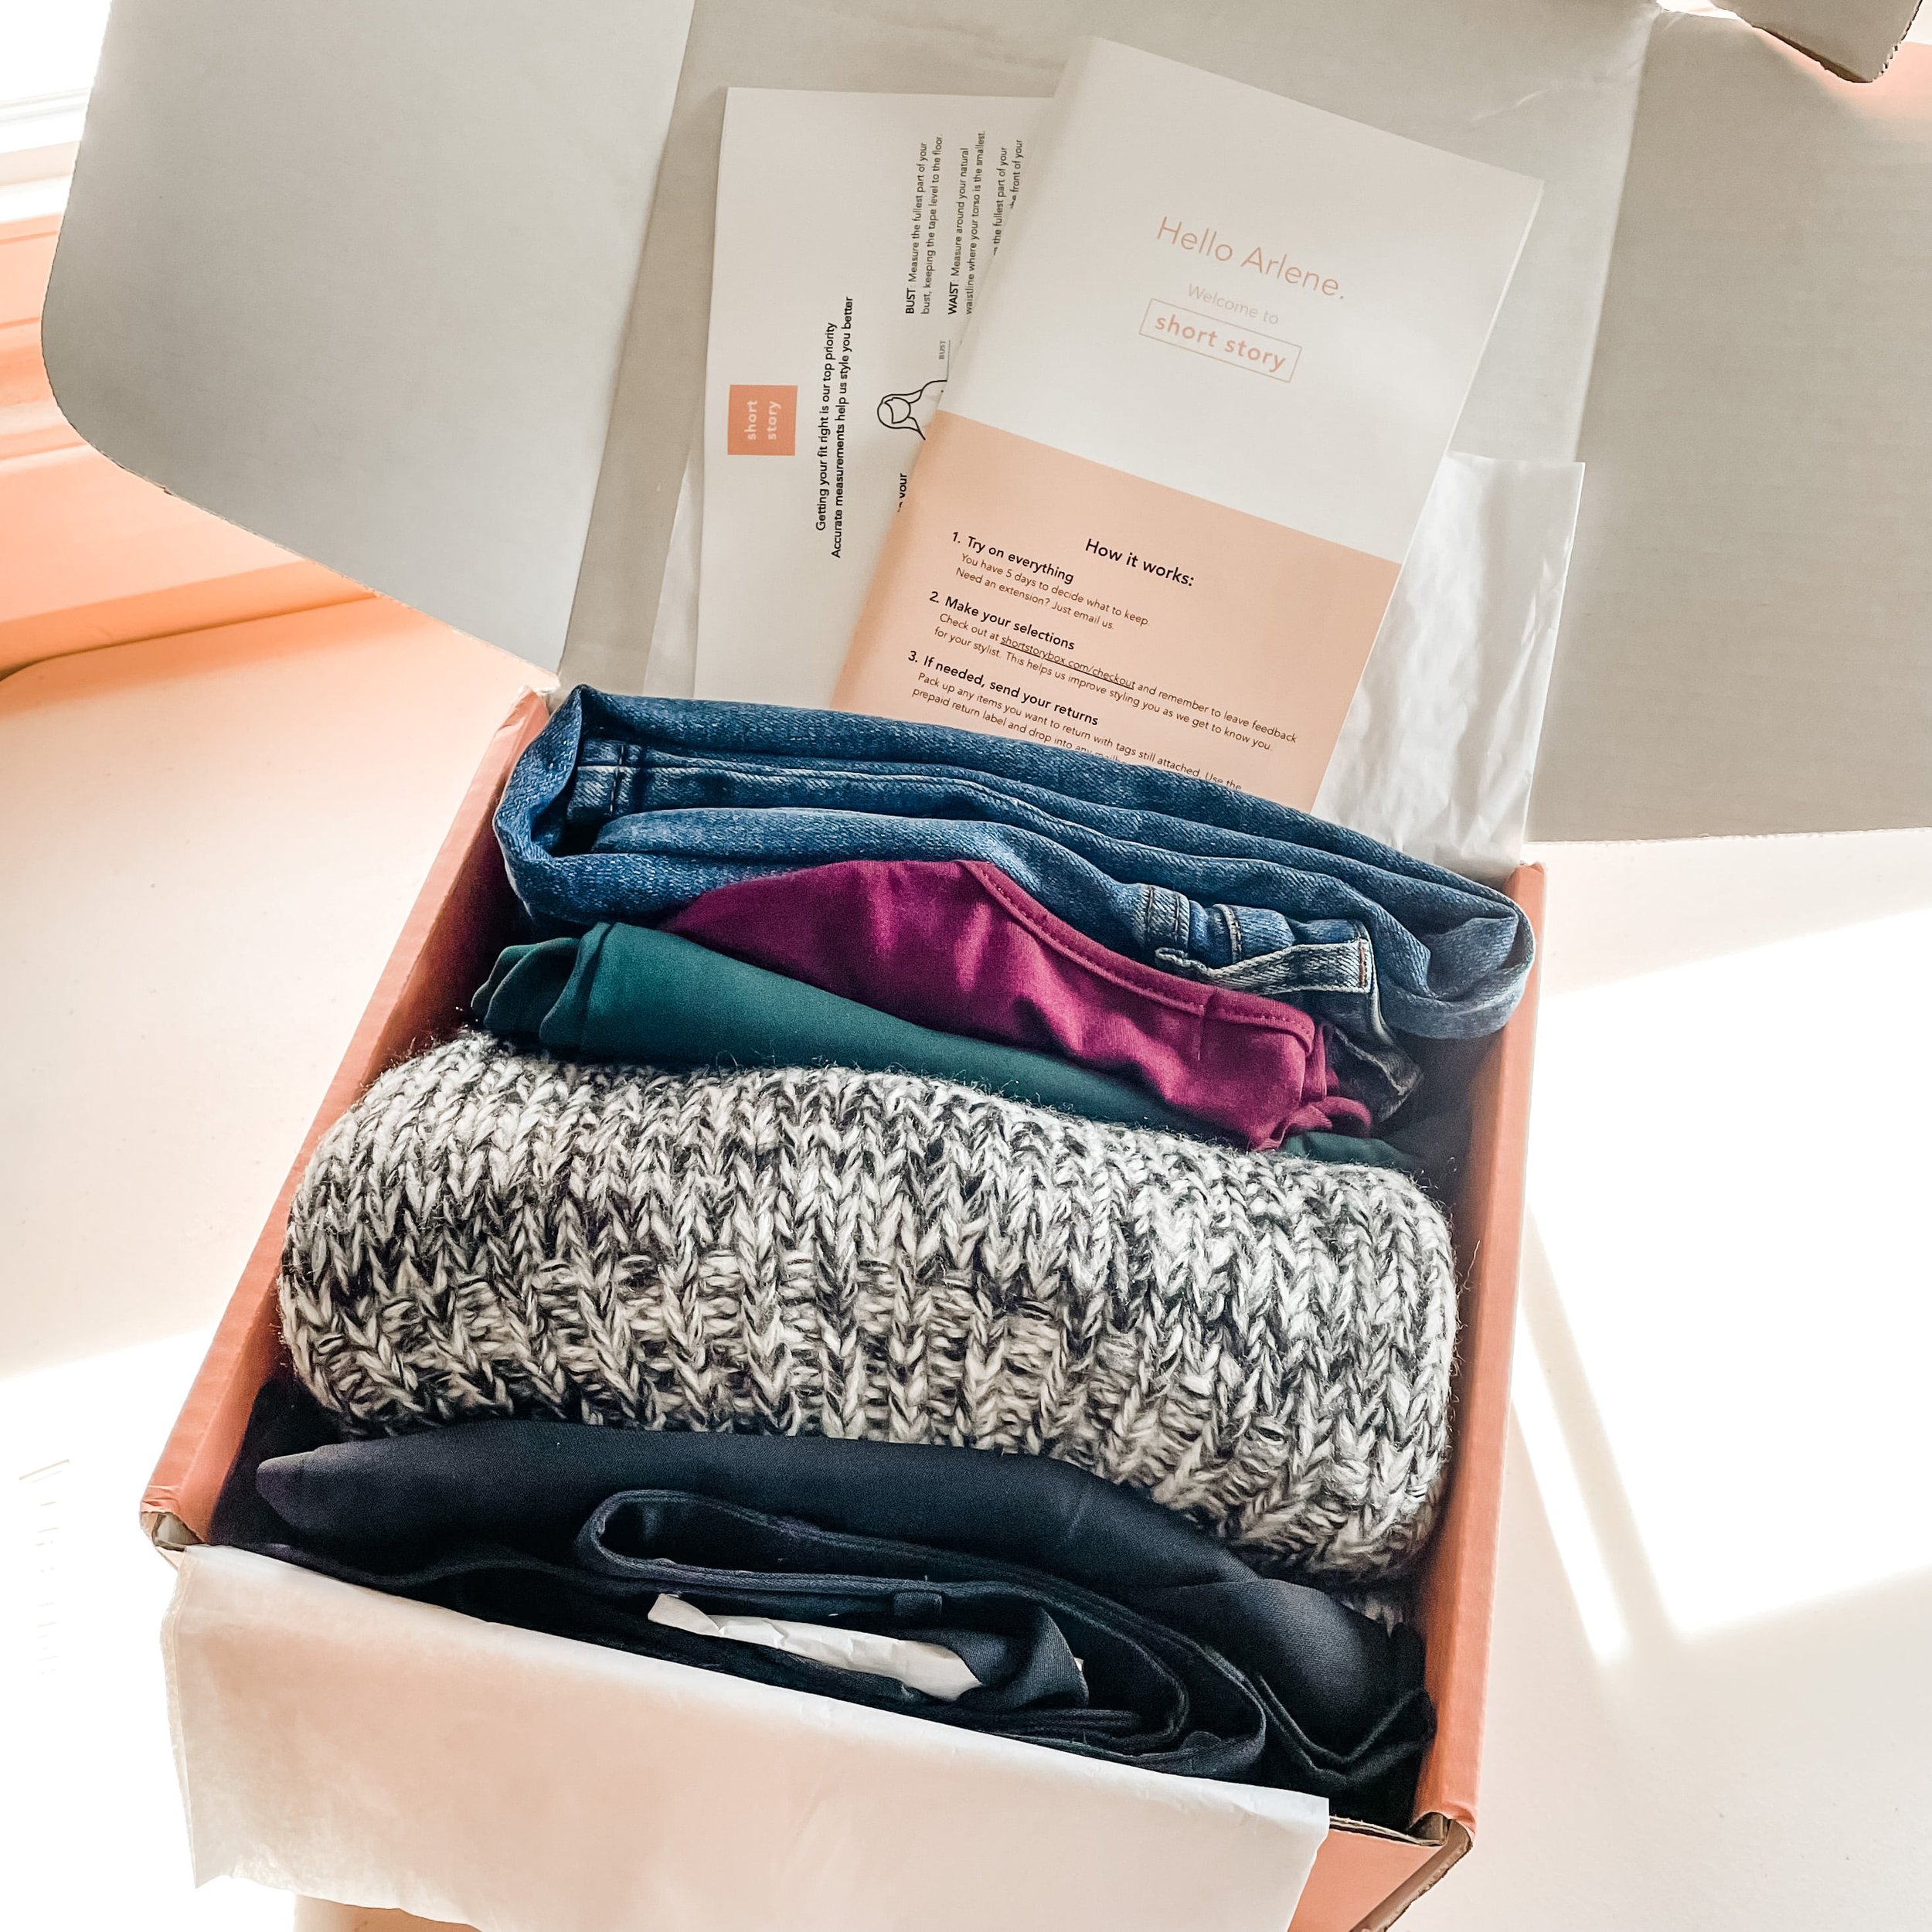 Short Story Box Review: Subscription Clothing Service for Petite Women —  From Pennies to Plenty